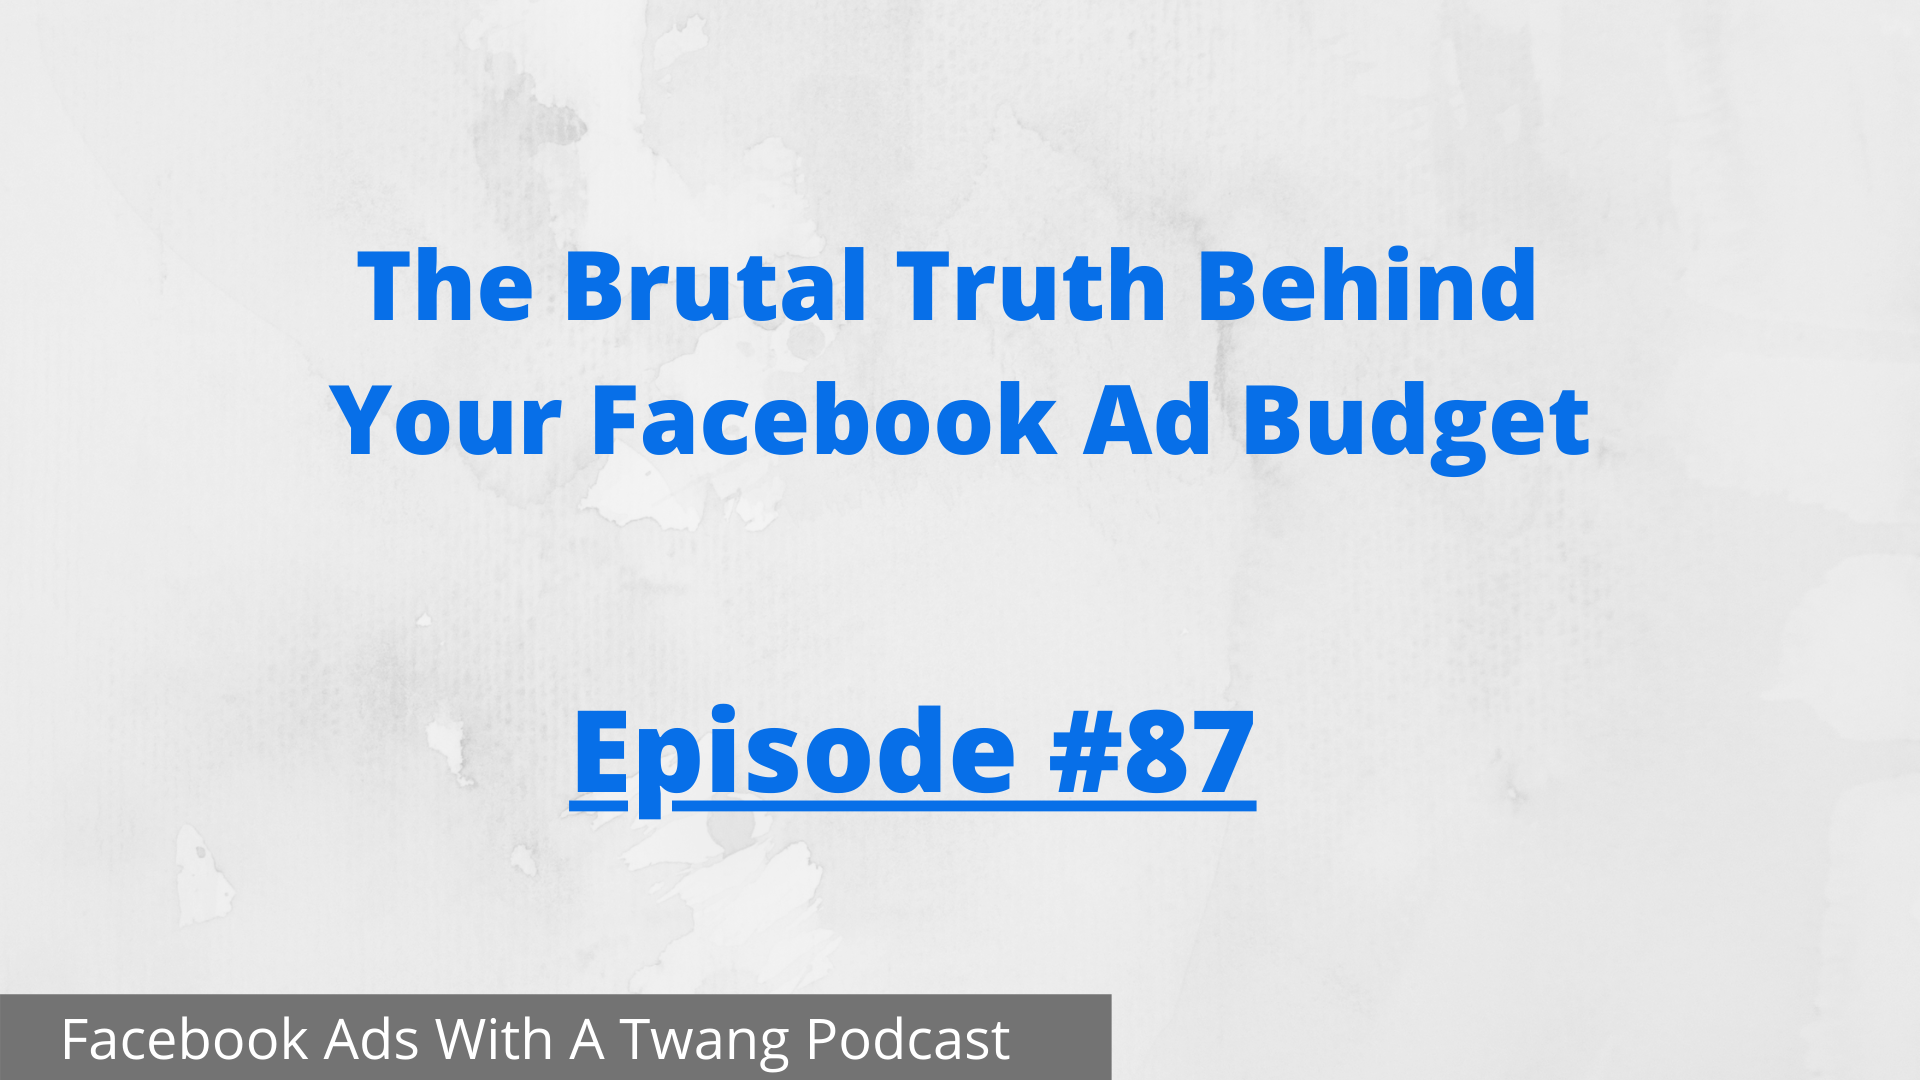 The brutal truth behind your Facebook ad budget